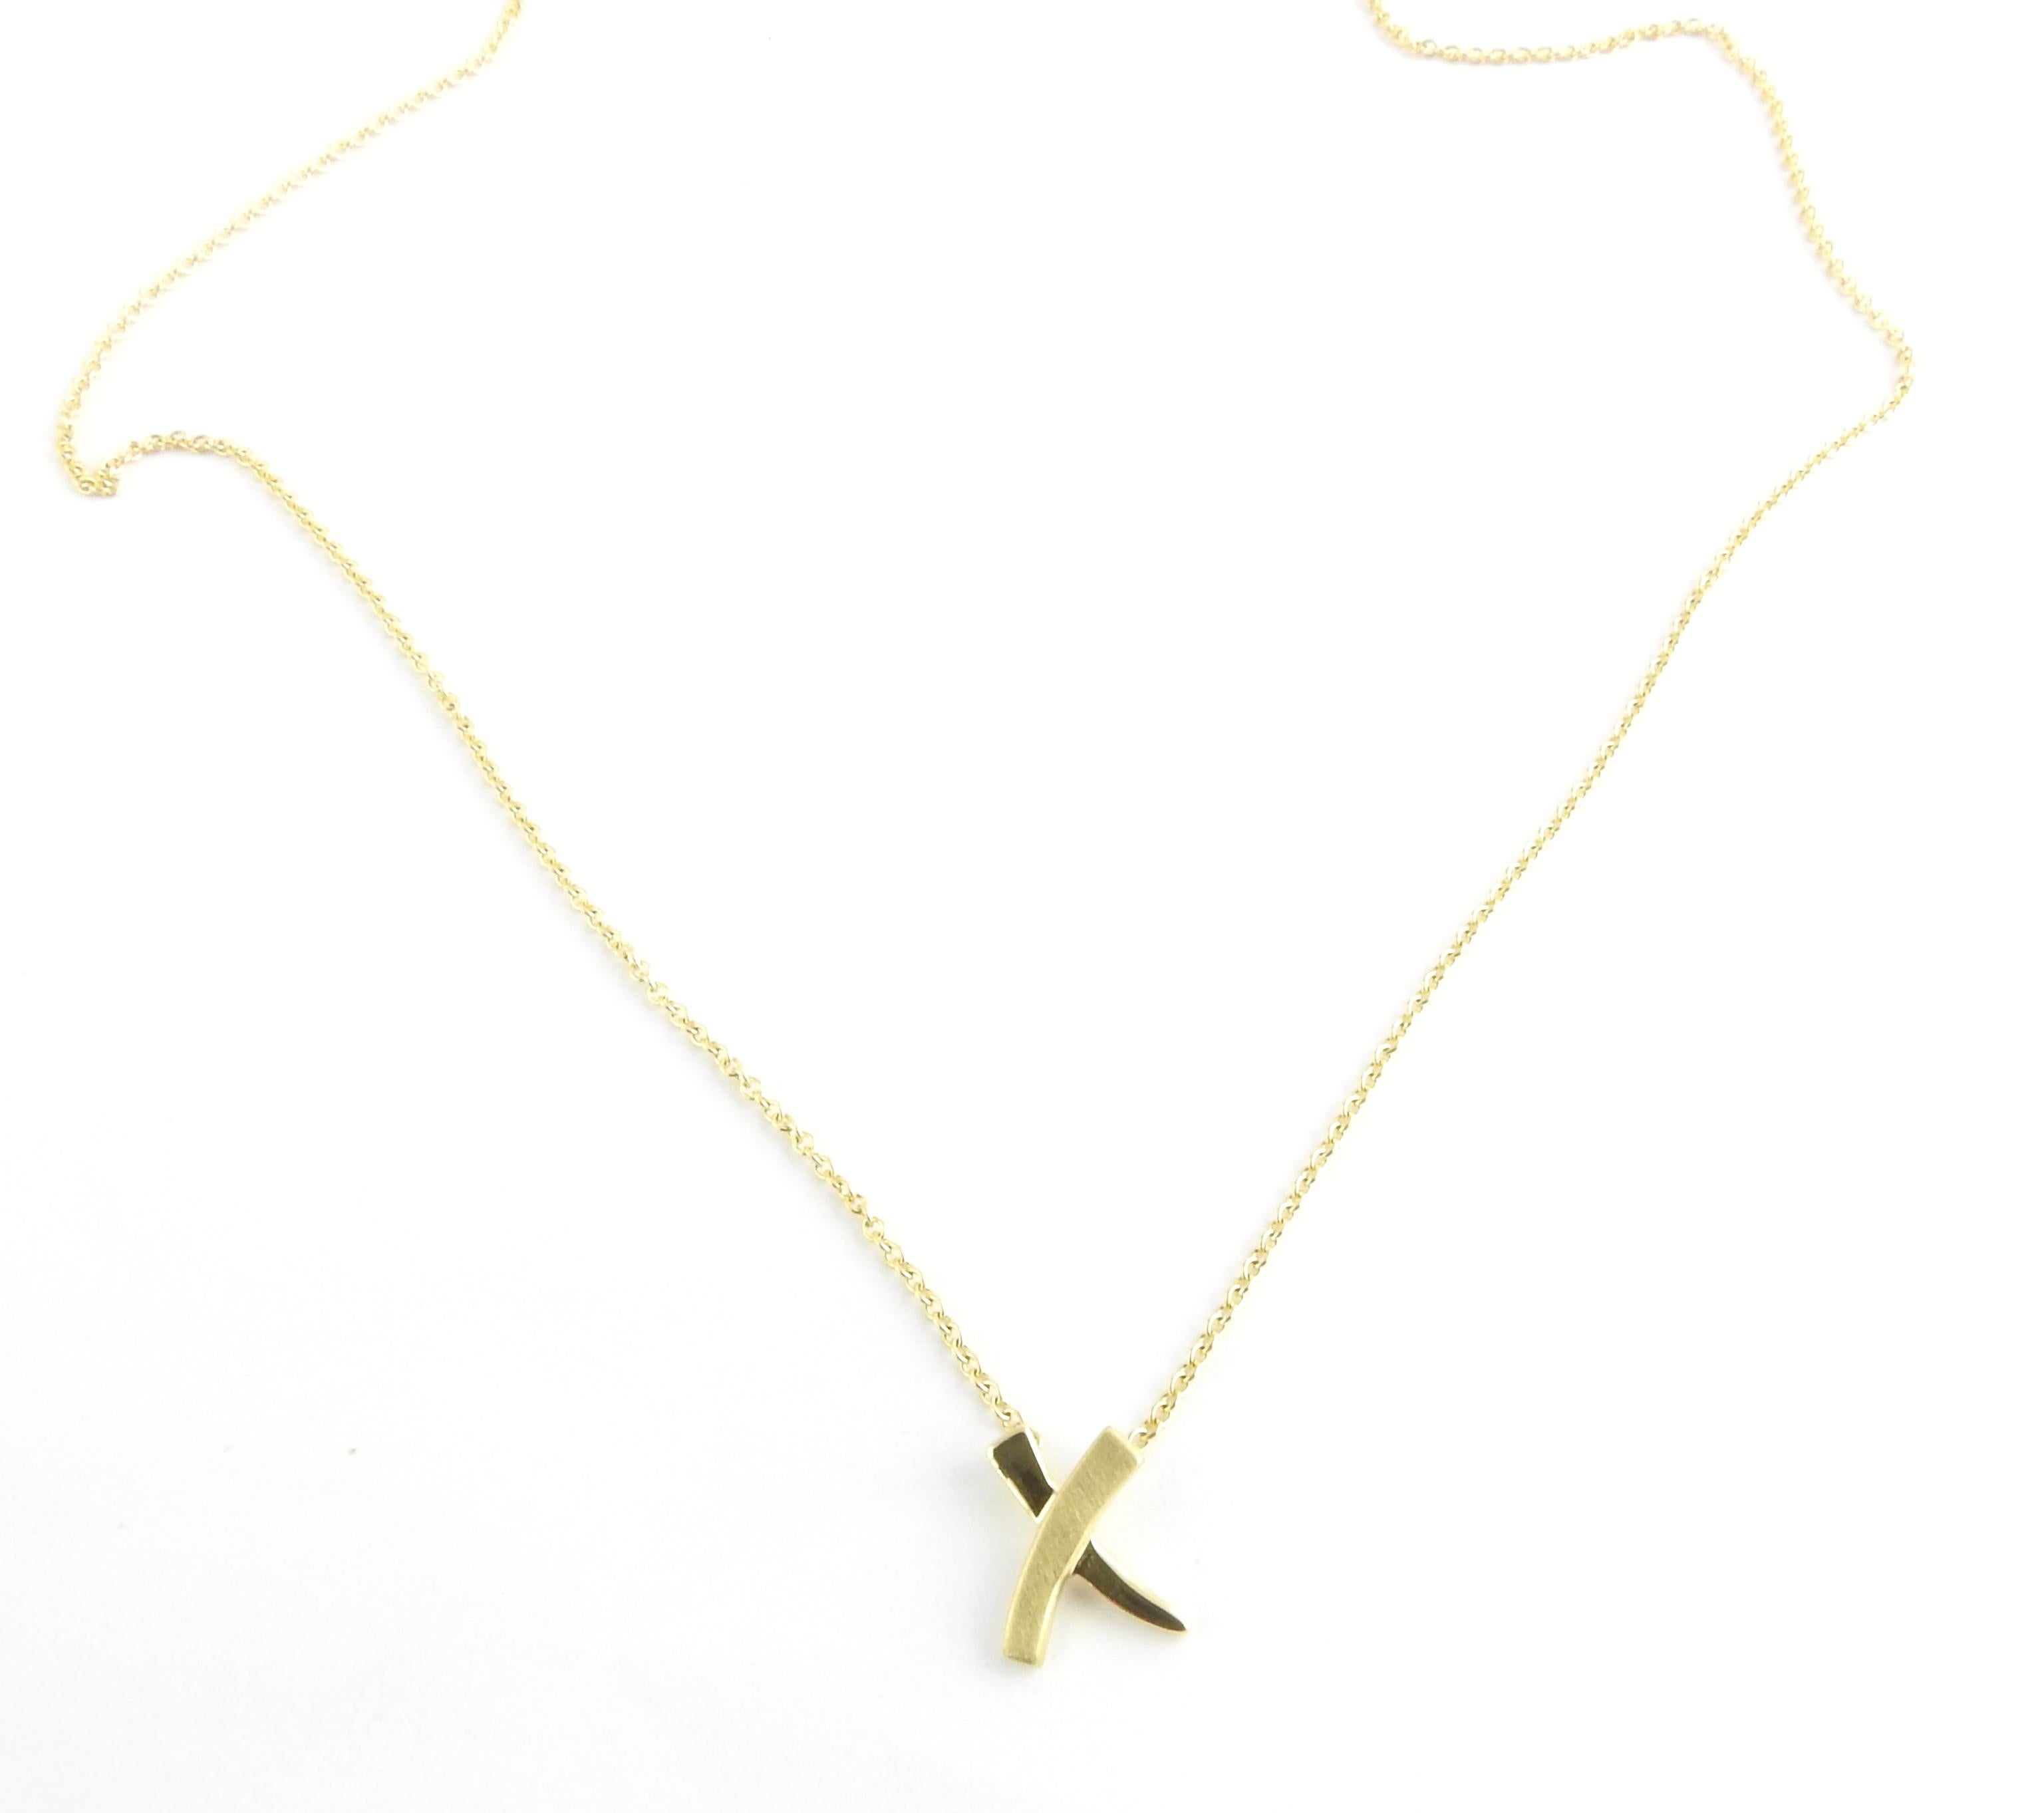 Tiffany & Co. 18K Yellow Gold Paloma Picasso X Necklace

This authentic Tiffany & Co. Necklace is a x pendant set on a 16